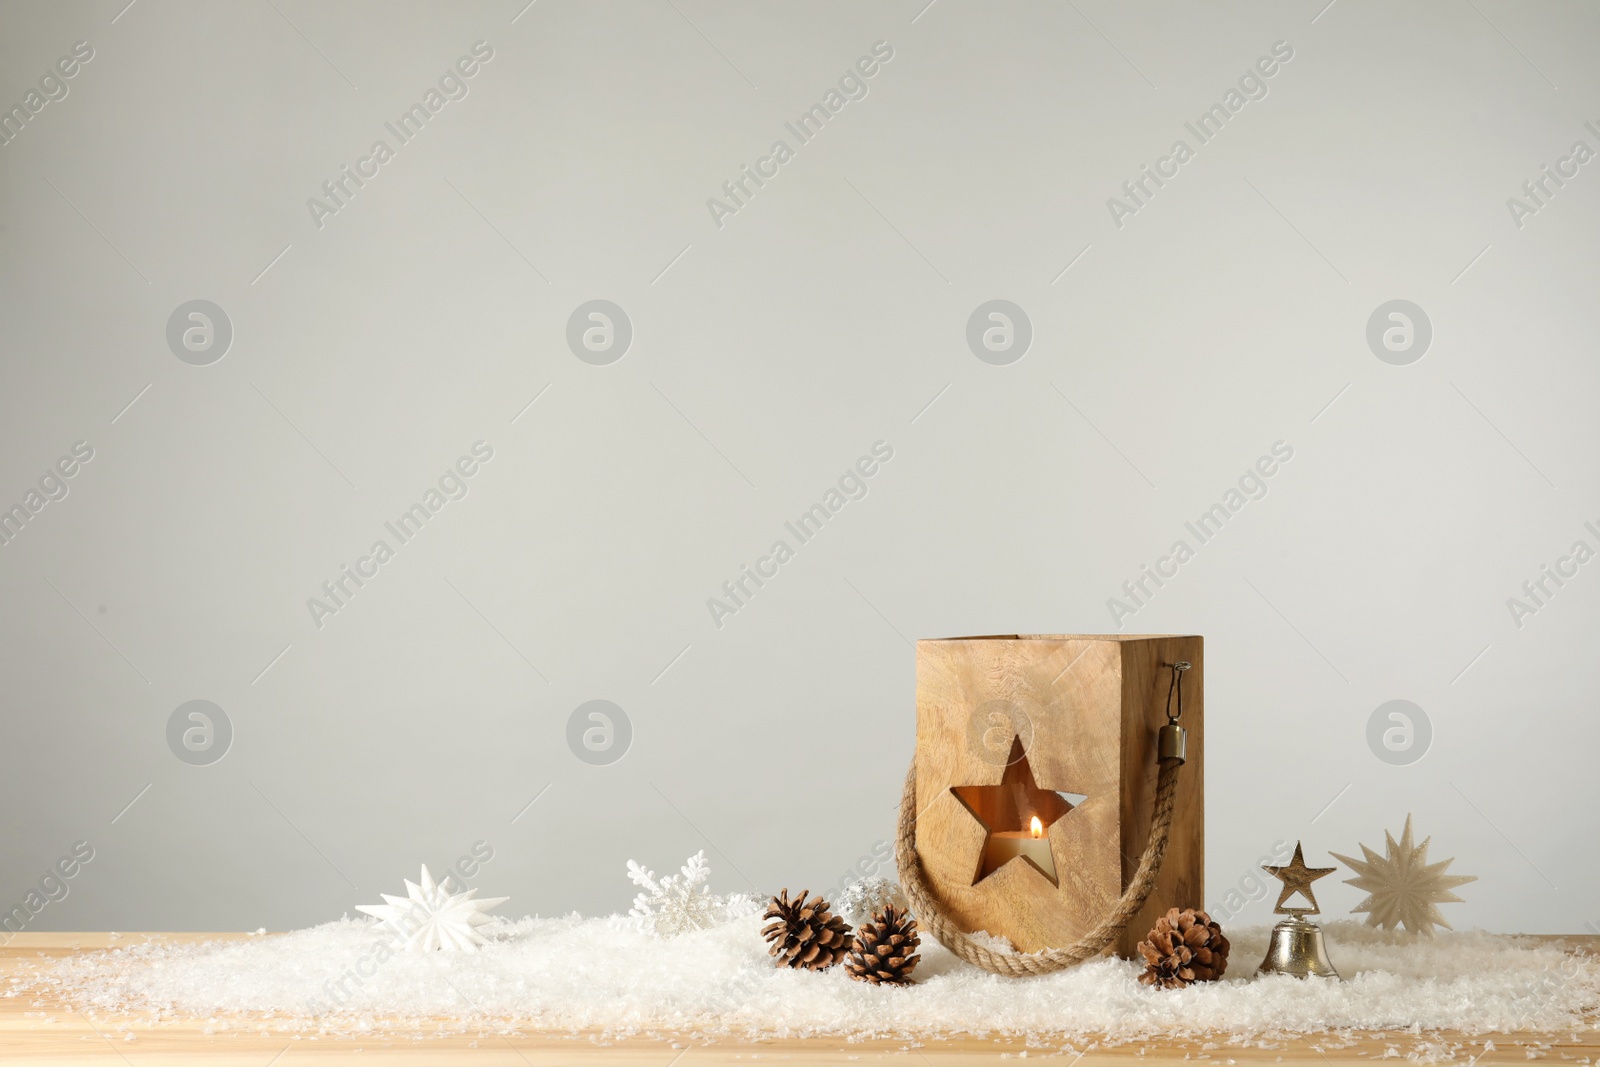 Photo of Composition with wooden Christmas lantern on table against light grey background, space for text